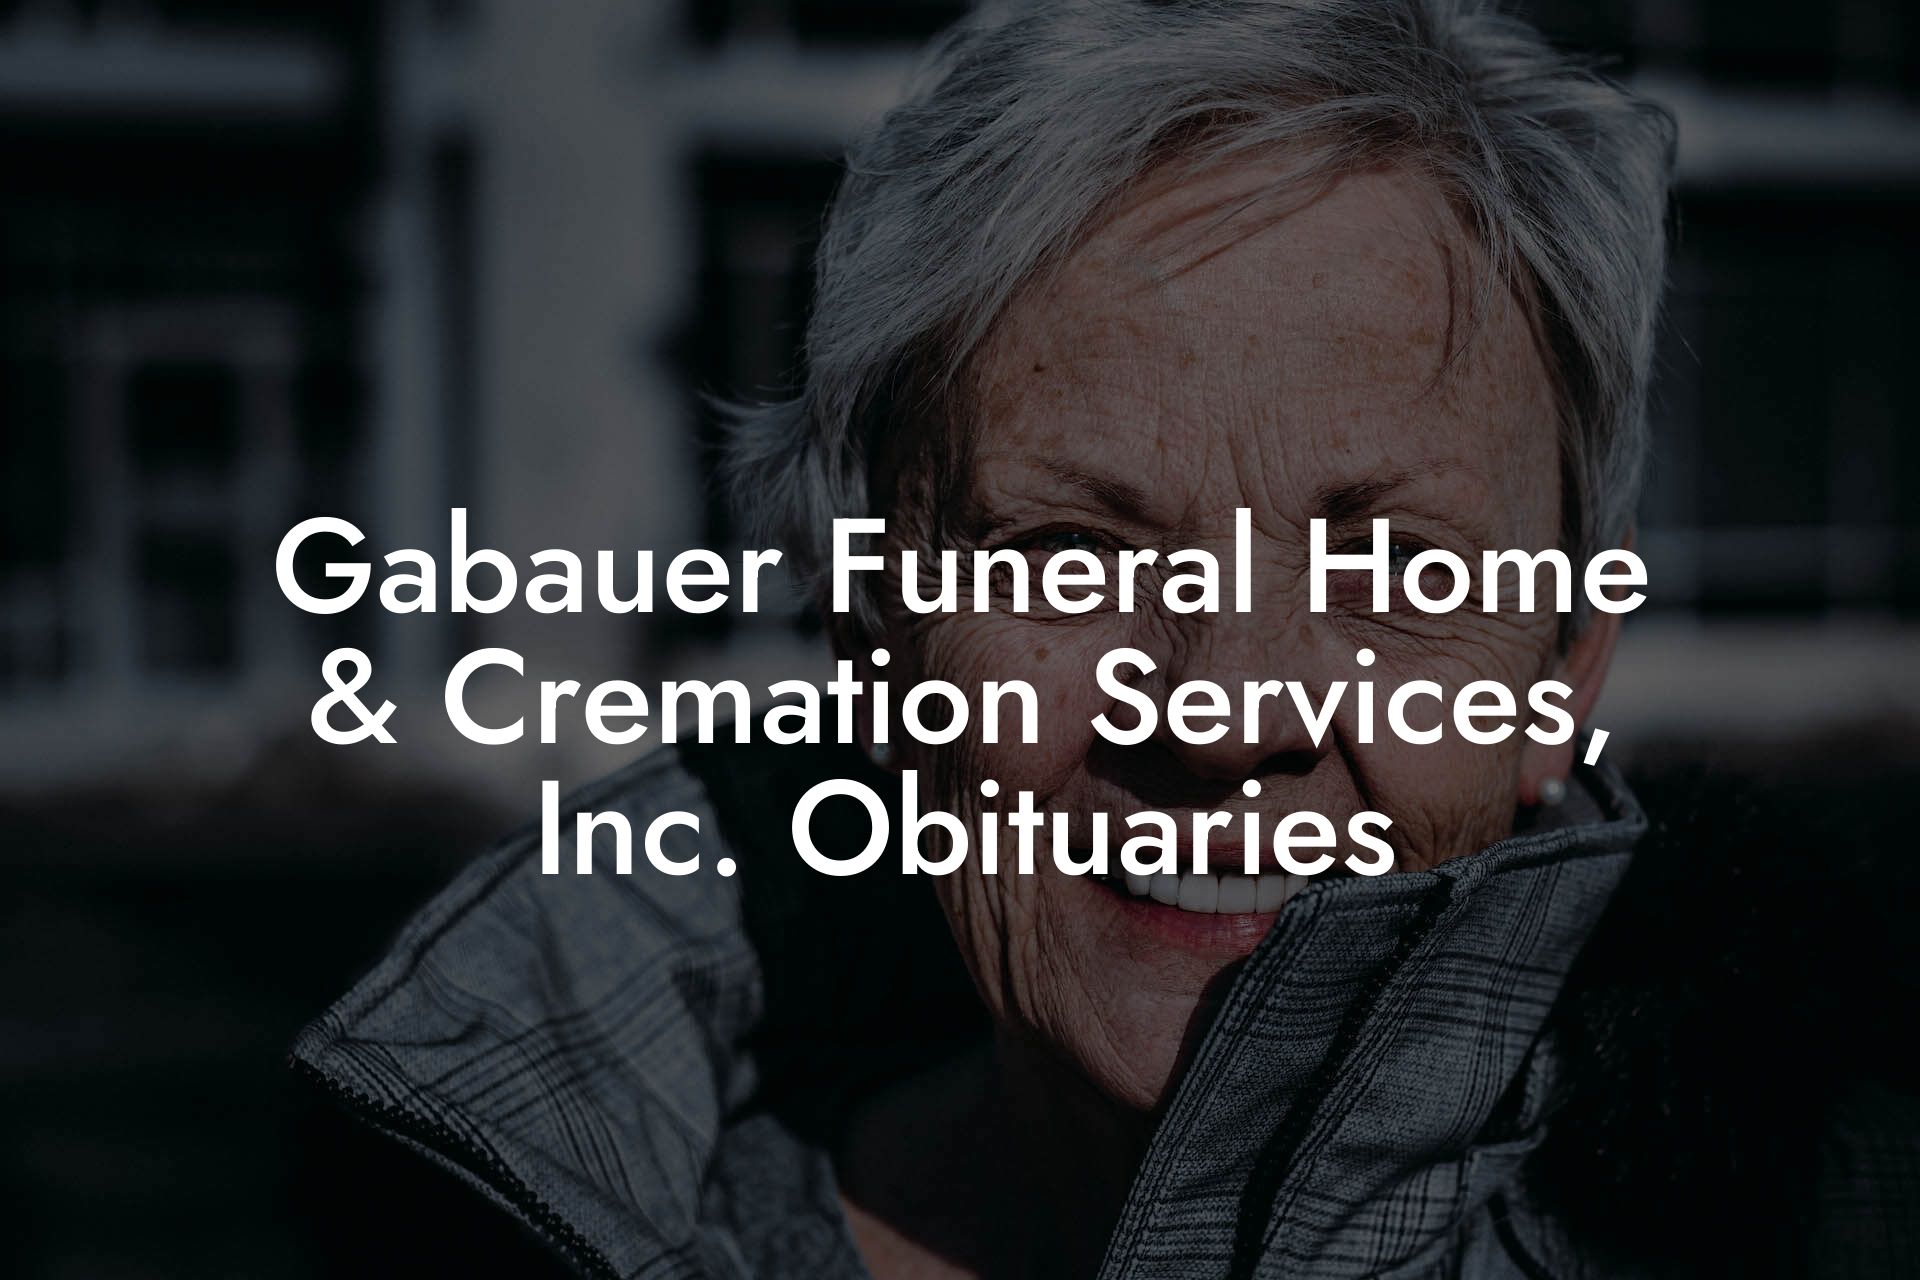 Gabauer Funeral Home & Cremation Services, Inc. Obituaries